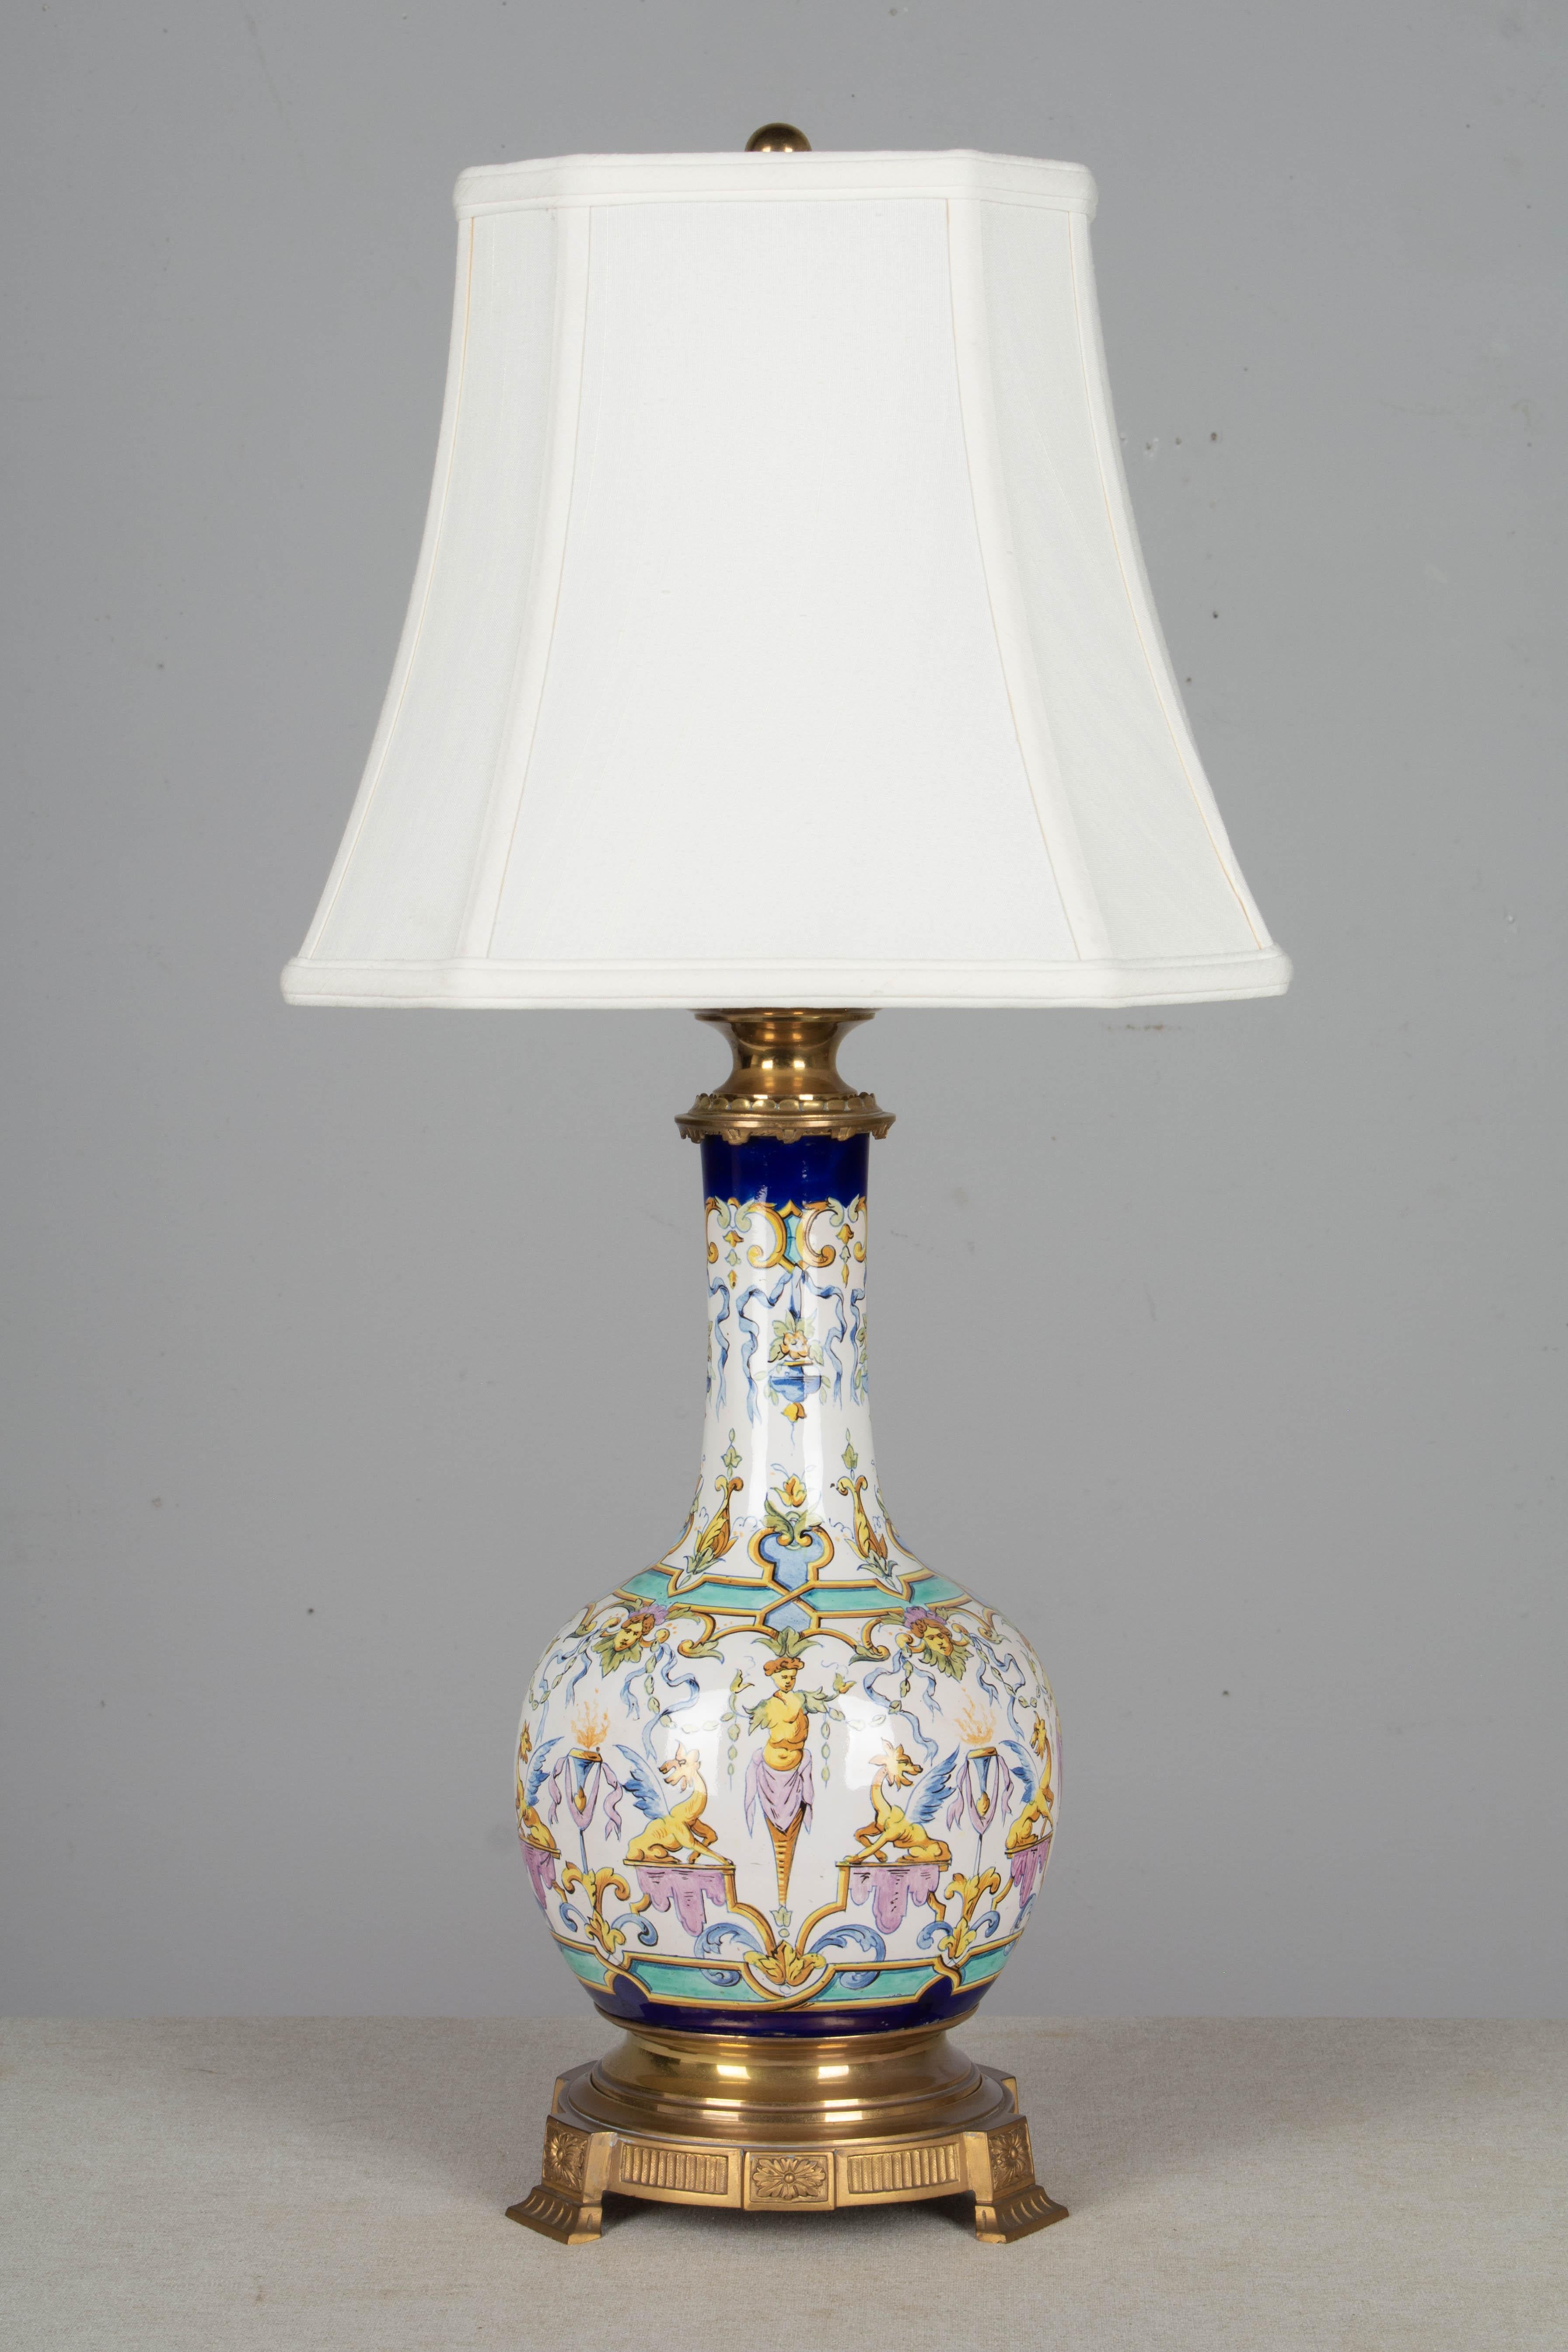 A pair of 19th century French Gien bronze mounted faience table lamps. Original bronze hardware with heavy cast base and neck, converted from oil lamps. Hand painted faience in gold, lavender, turquoise and cobalt blue on white ground. The